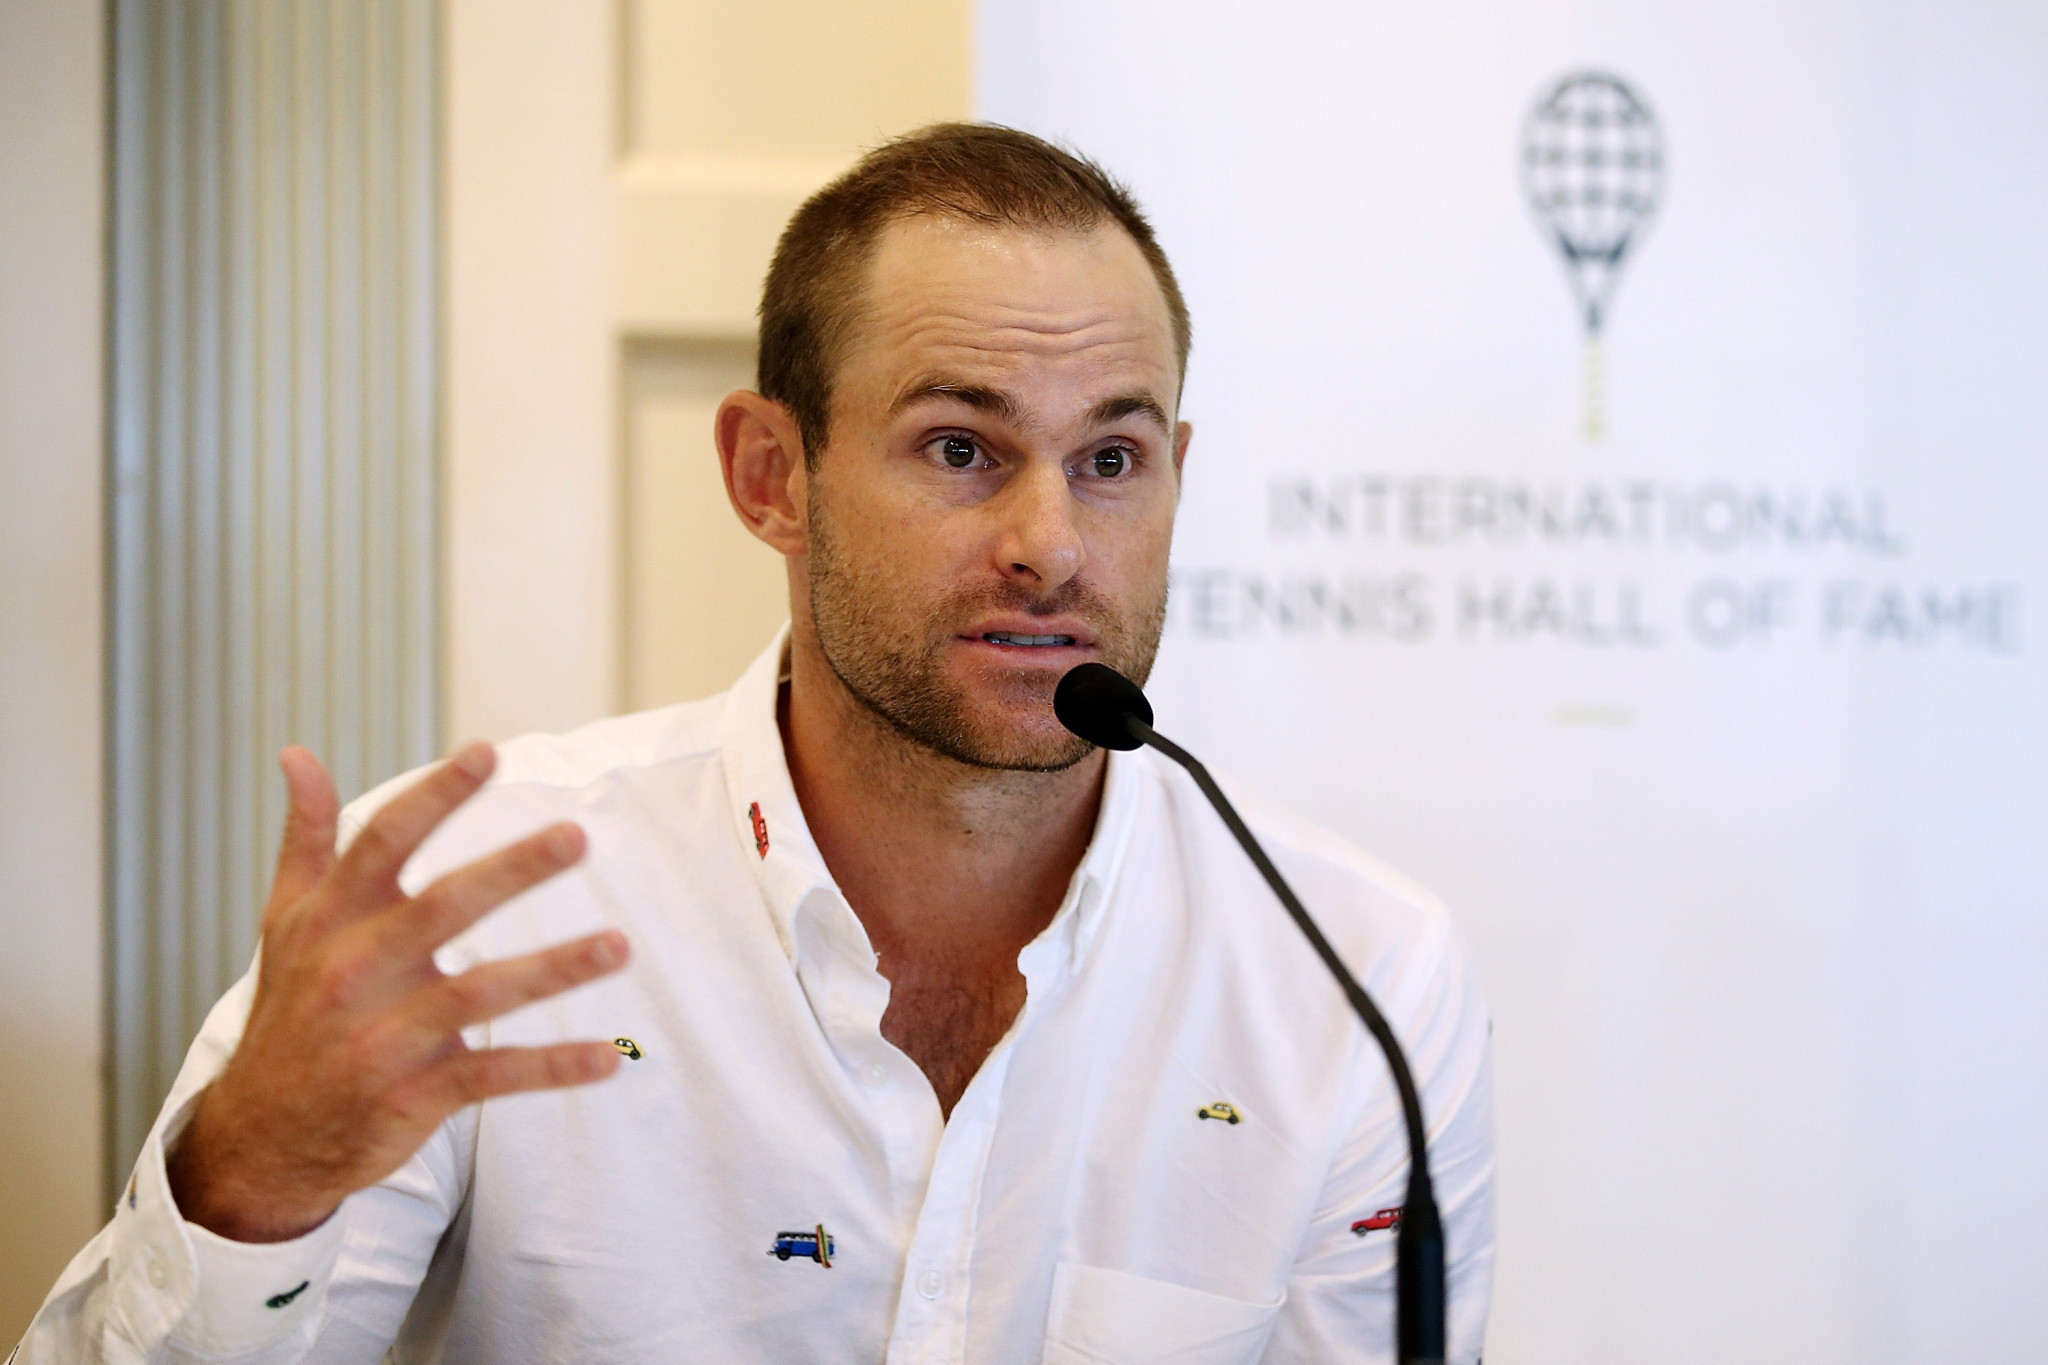 Andy Roddick has criticised the ATP's decision not to follow the WTA's lead in suspending its tournaments in China ©Getty Images